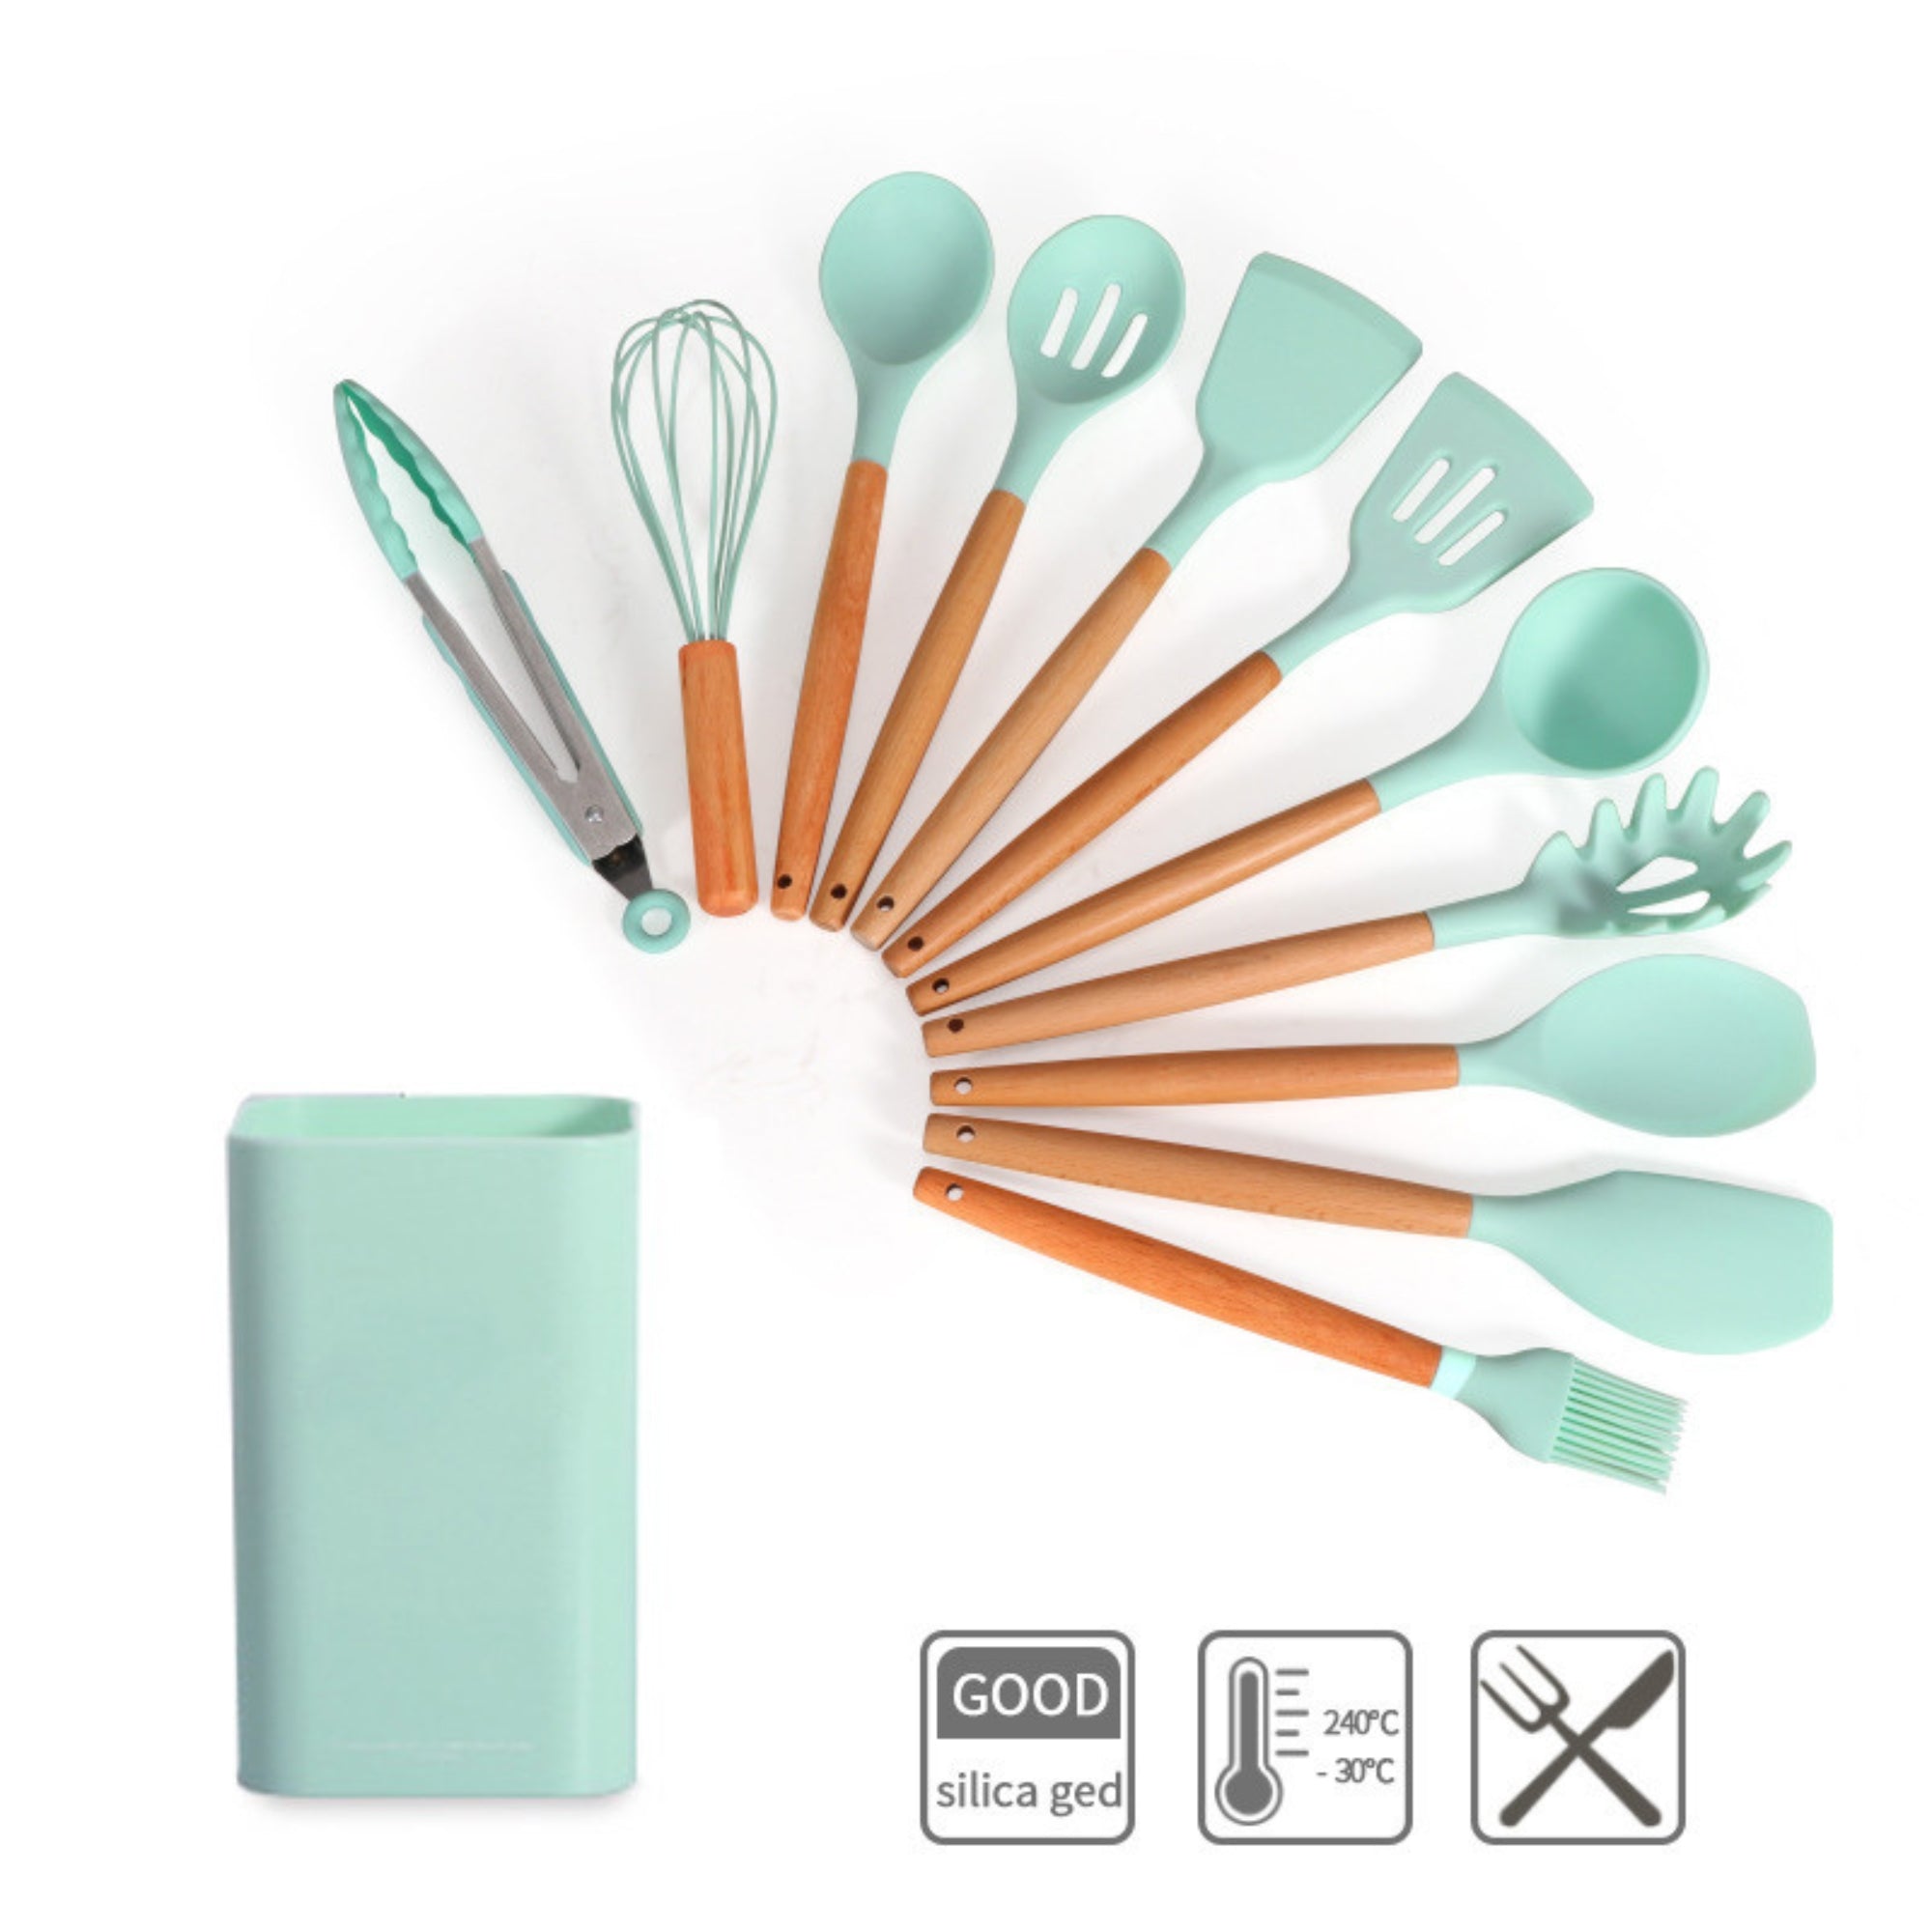 12-Piece Set Non-Stick Silicone Kitchen Cooking Utensils With Wood Handles